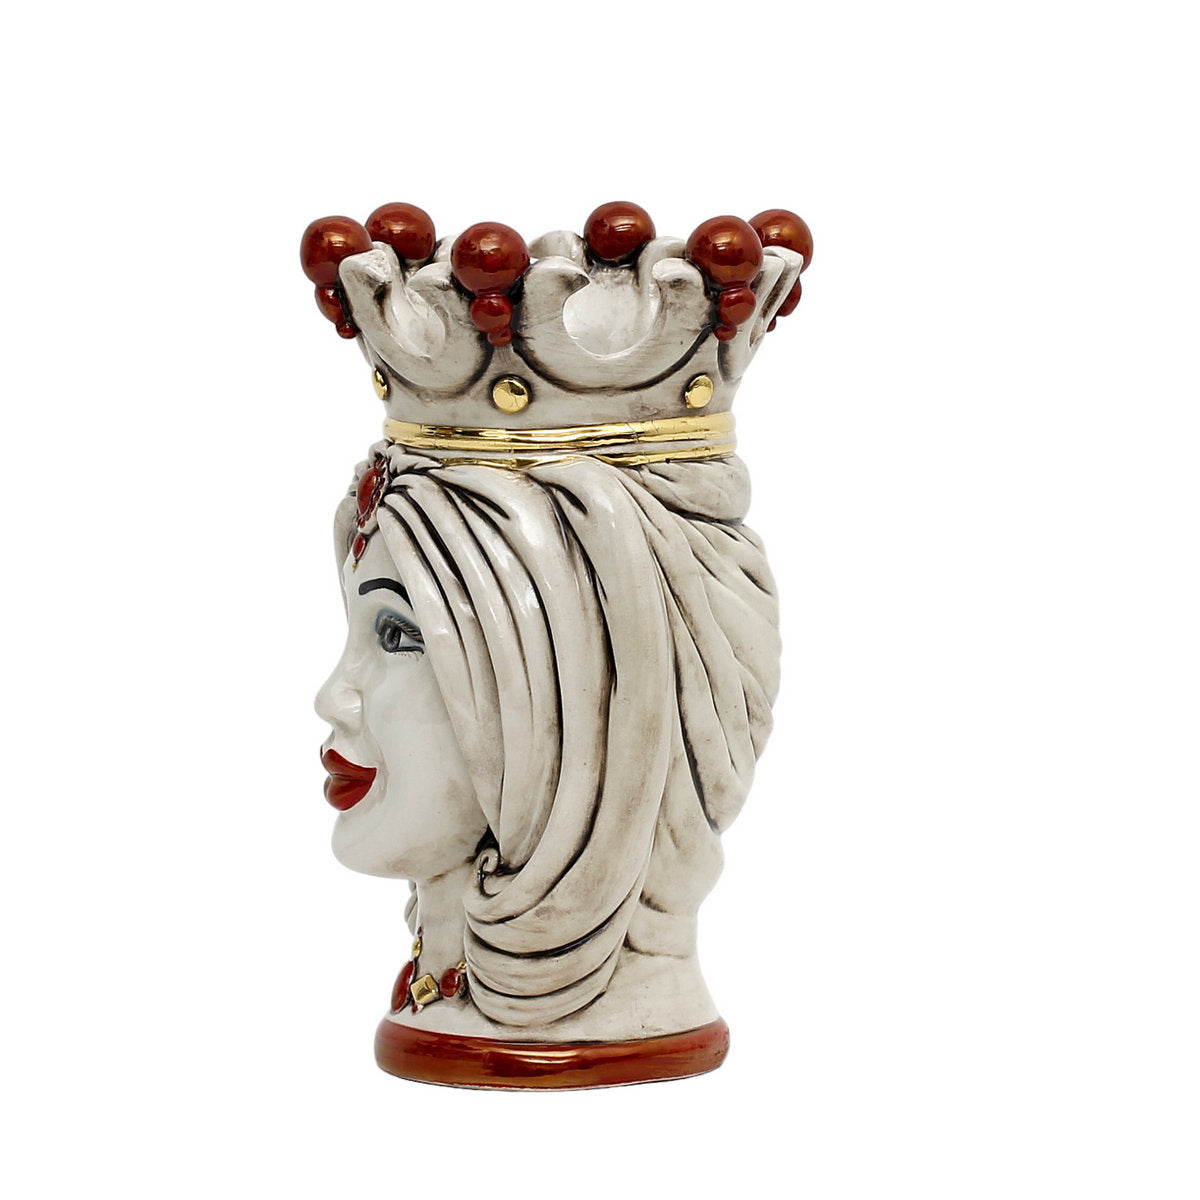 CALTAGIRONE: Moorish Sicilian Head Vase - Woman Antiqued White glaze with 24 Carats Gold and Red Accents (Medium)